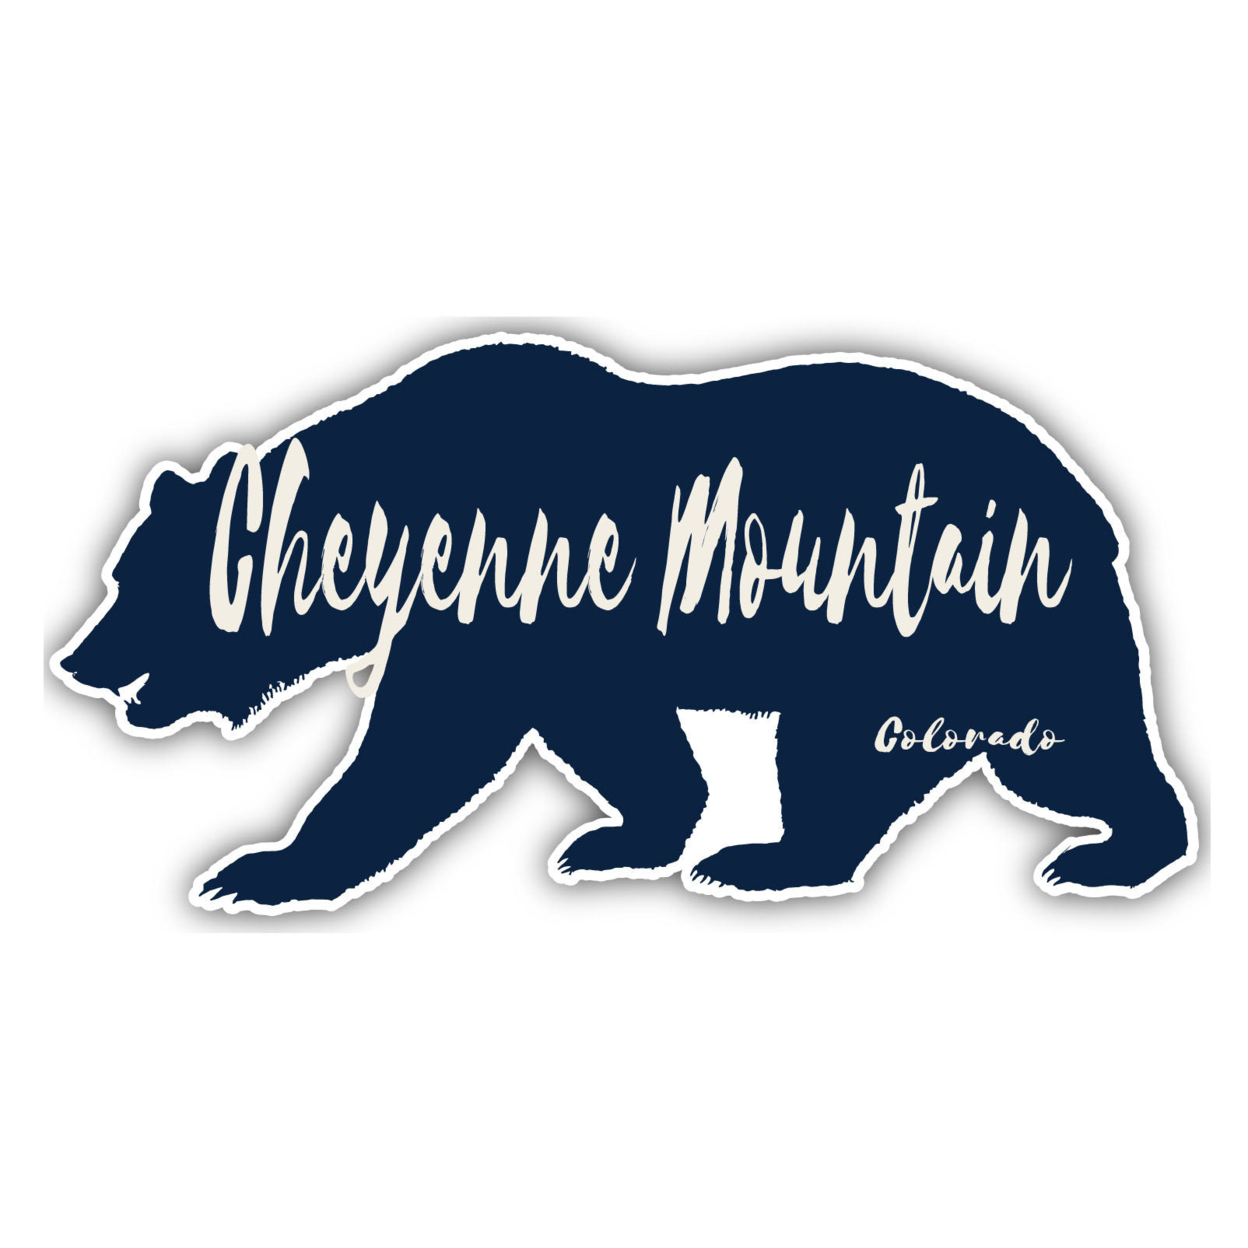 Cheyenne Mountain Colorado Souvenir Decorative Stickers (Choose Theme And Size) - 4-Pack, 6-Inch, Camp Life